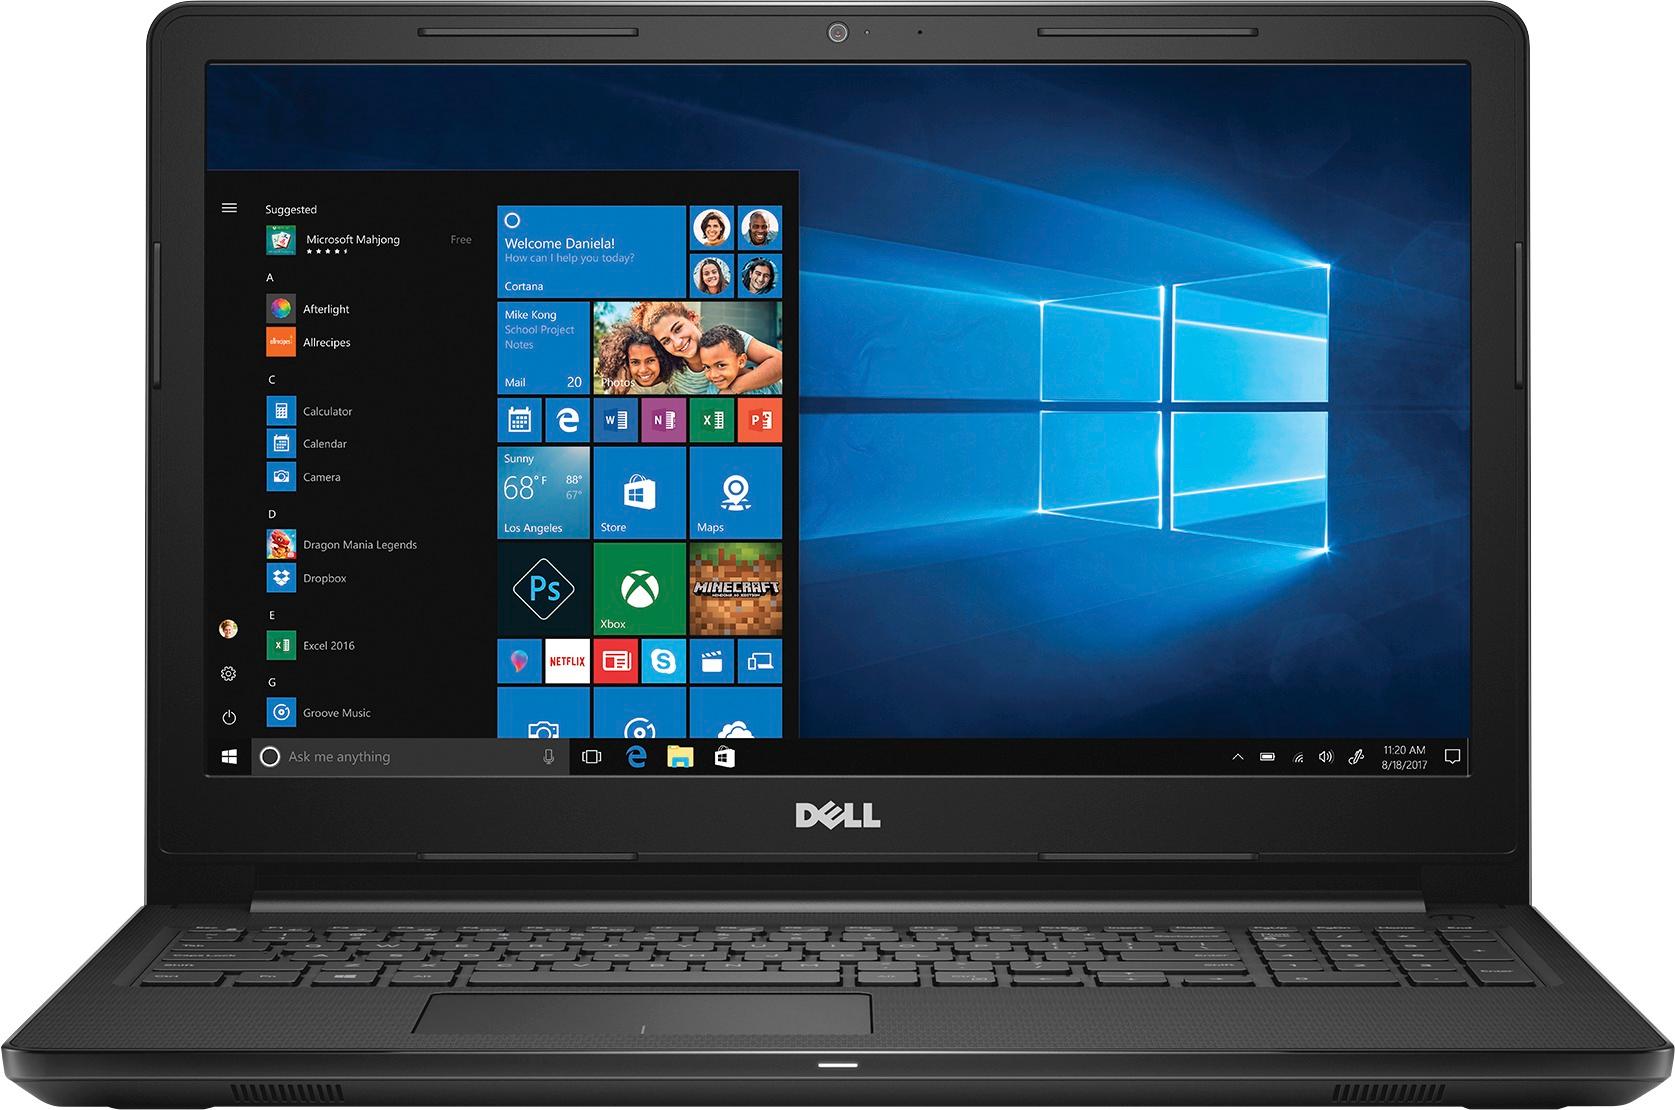 Dell Inspiron 15 6 Touch Screen Laptop Intel Core I5 8gb Memory 2tb Hard Drive Black I3567 5664blk Pus Best Buy